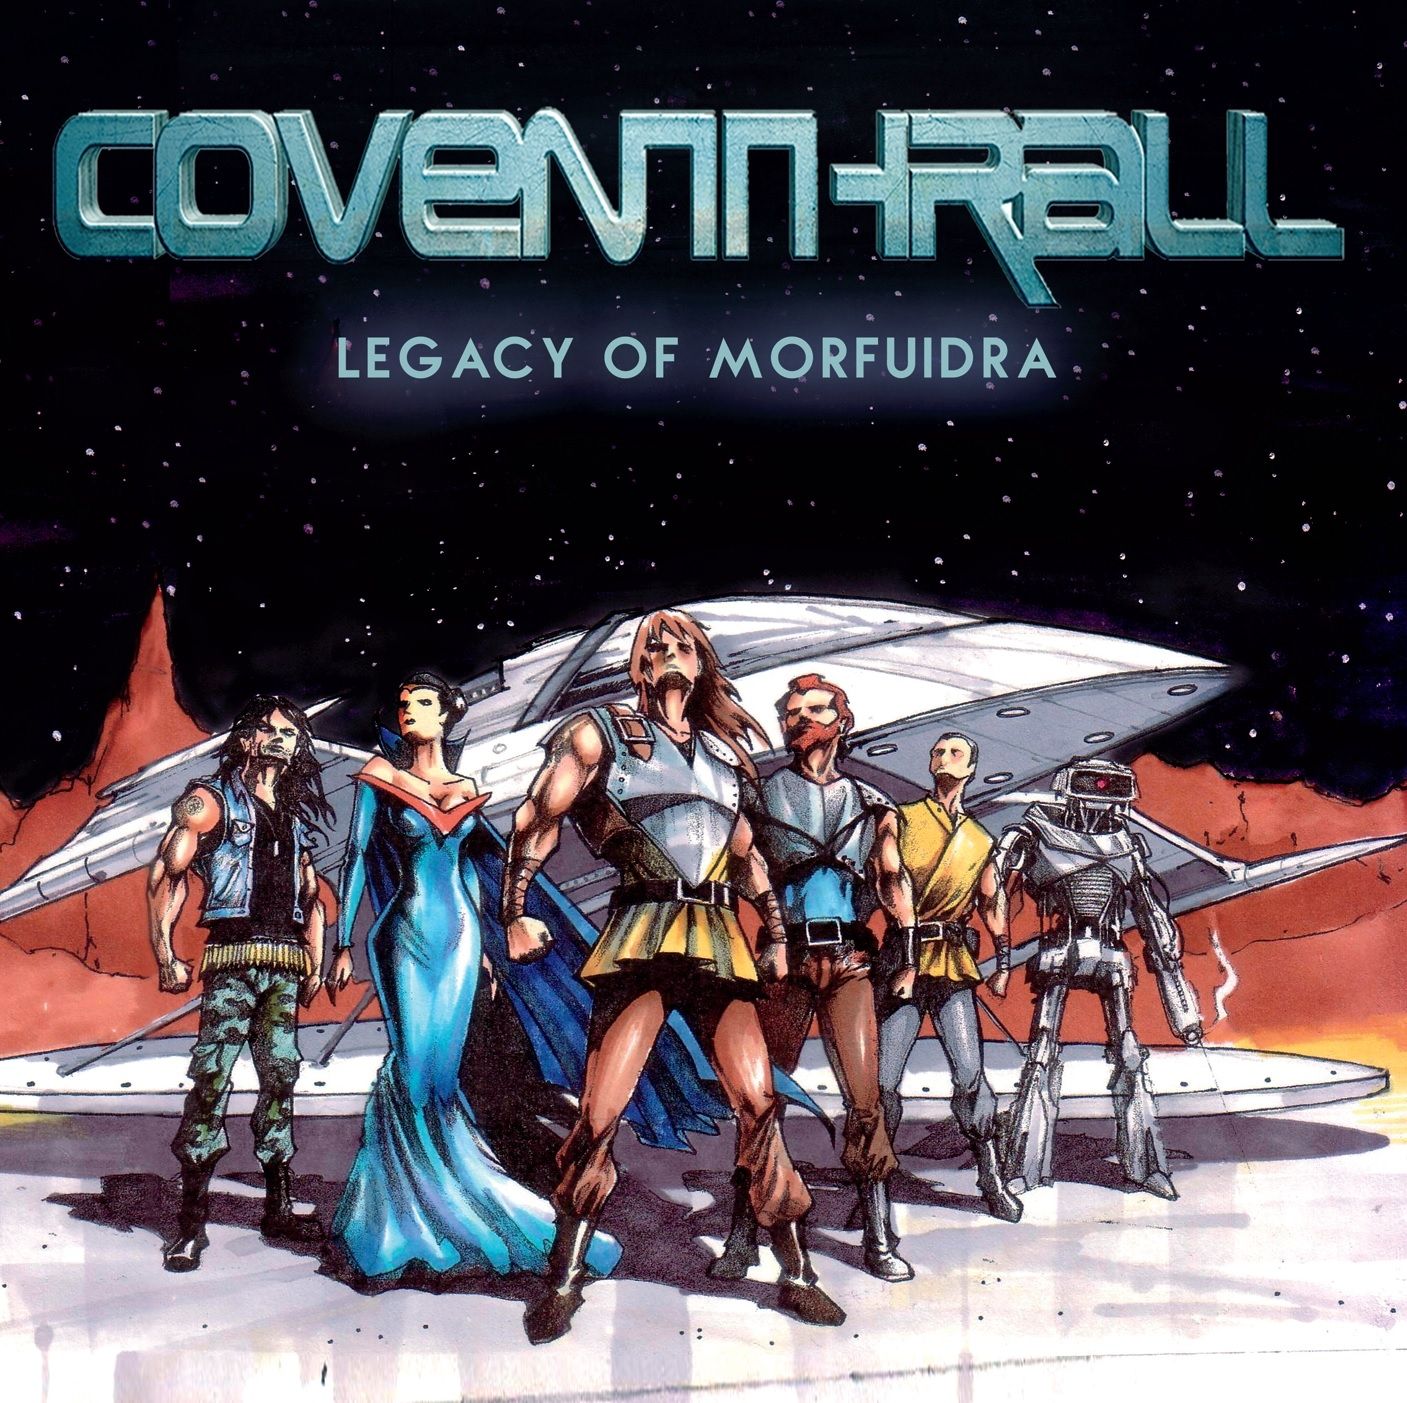 Coventhrall (Power Metal)